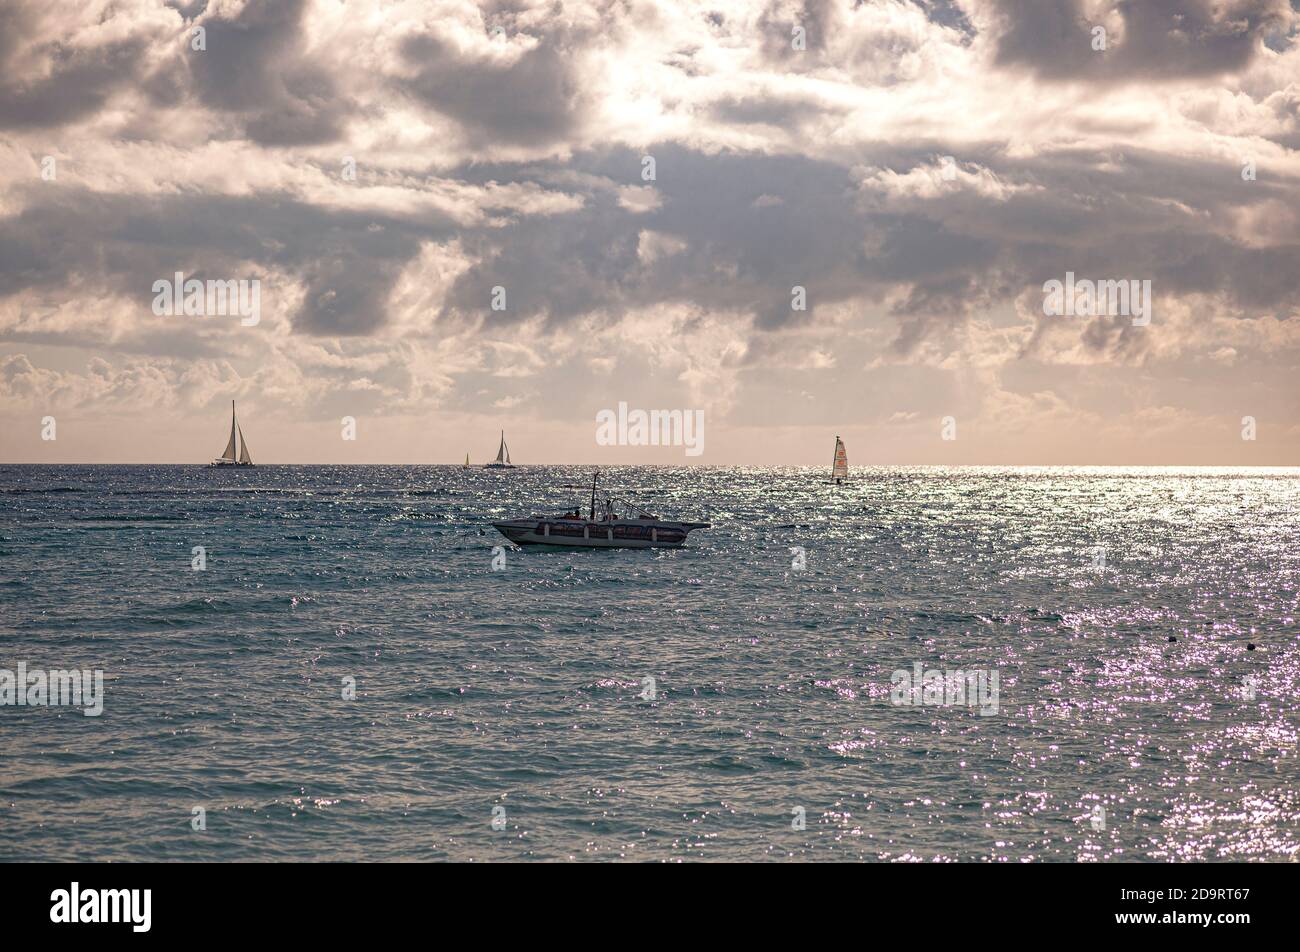 Boats on the sea on the horizon in Bayahibe, Dominican Republic Stock Photo